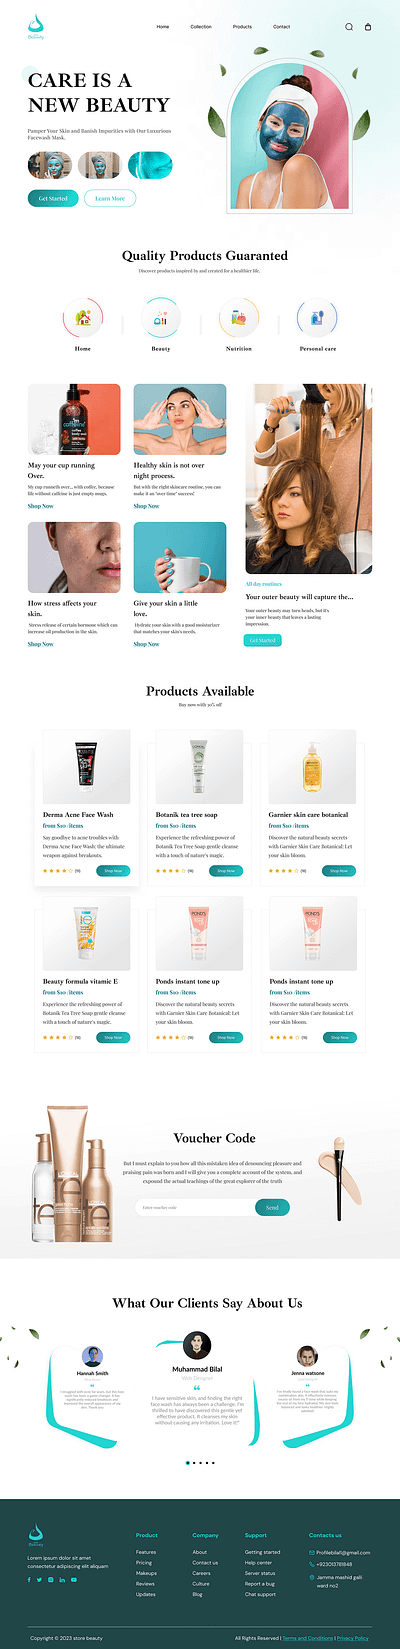 E-commerce Website - Beauty Products